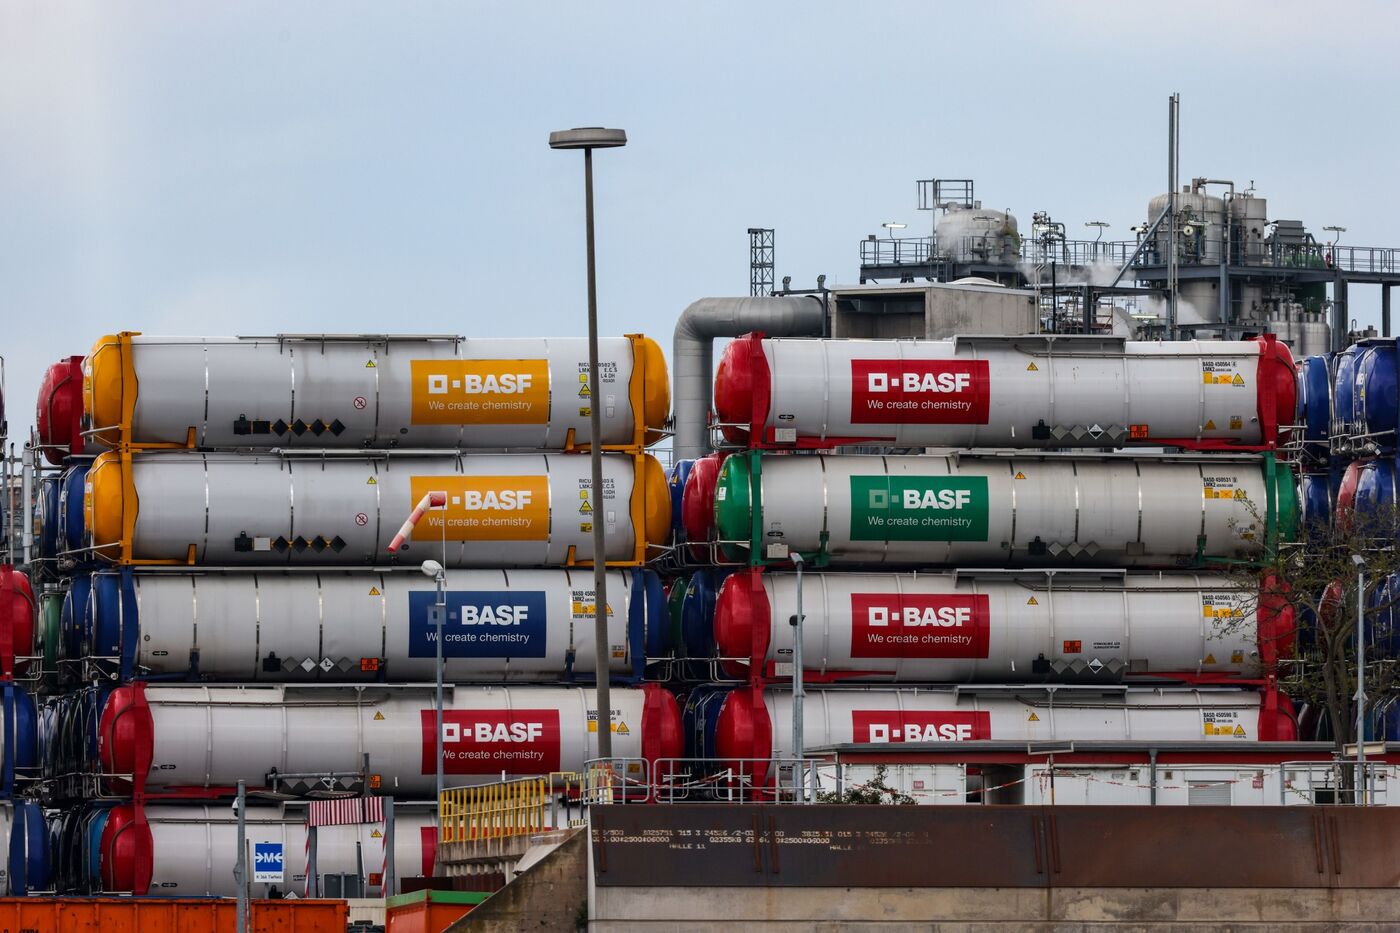 Railway tankers stacked at the BASF SE chemical plant in Ludwigshafen, Germany.